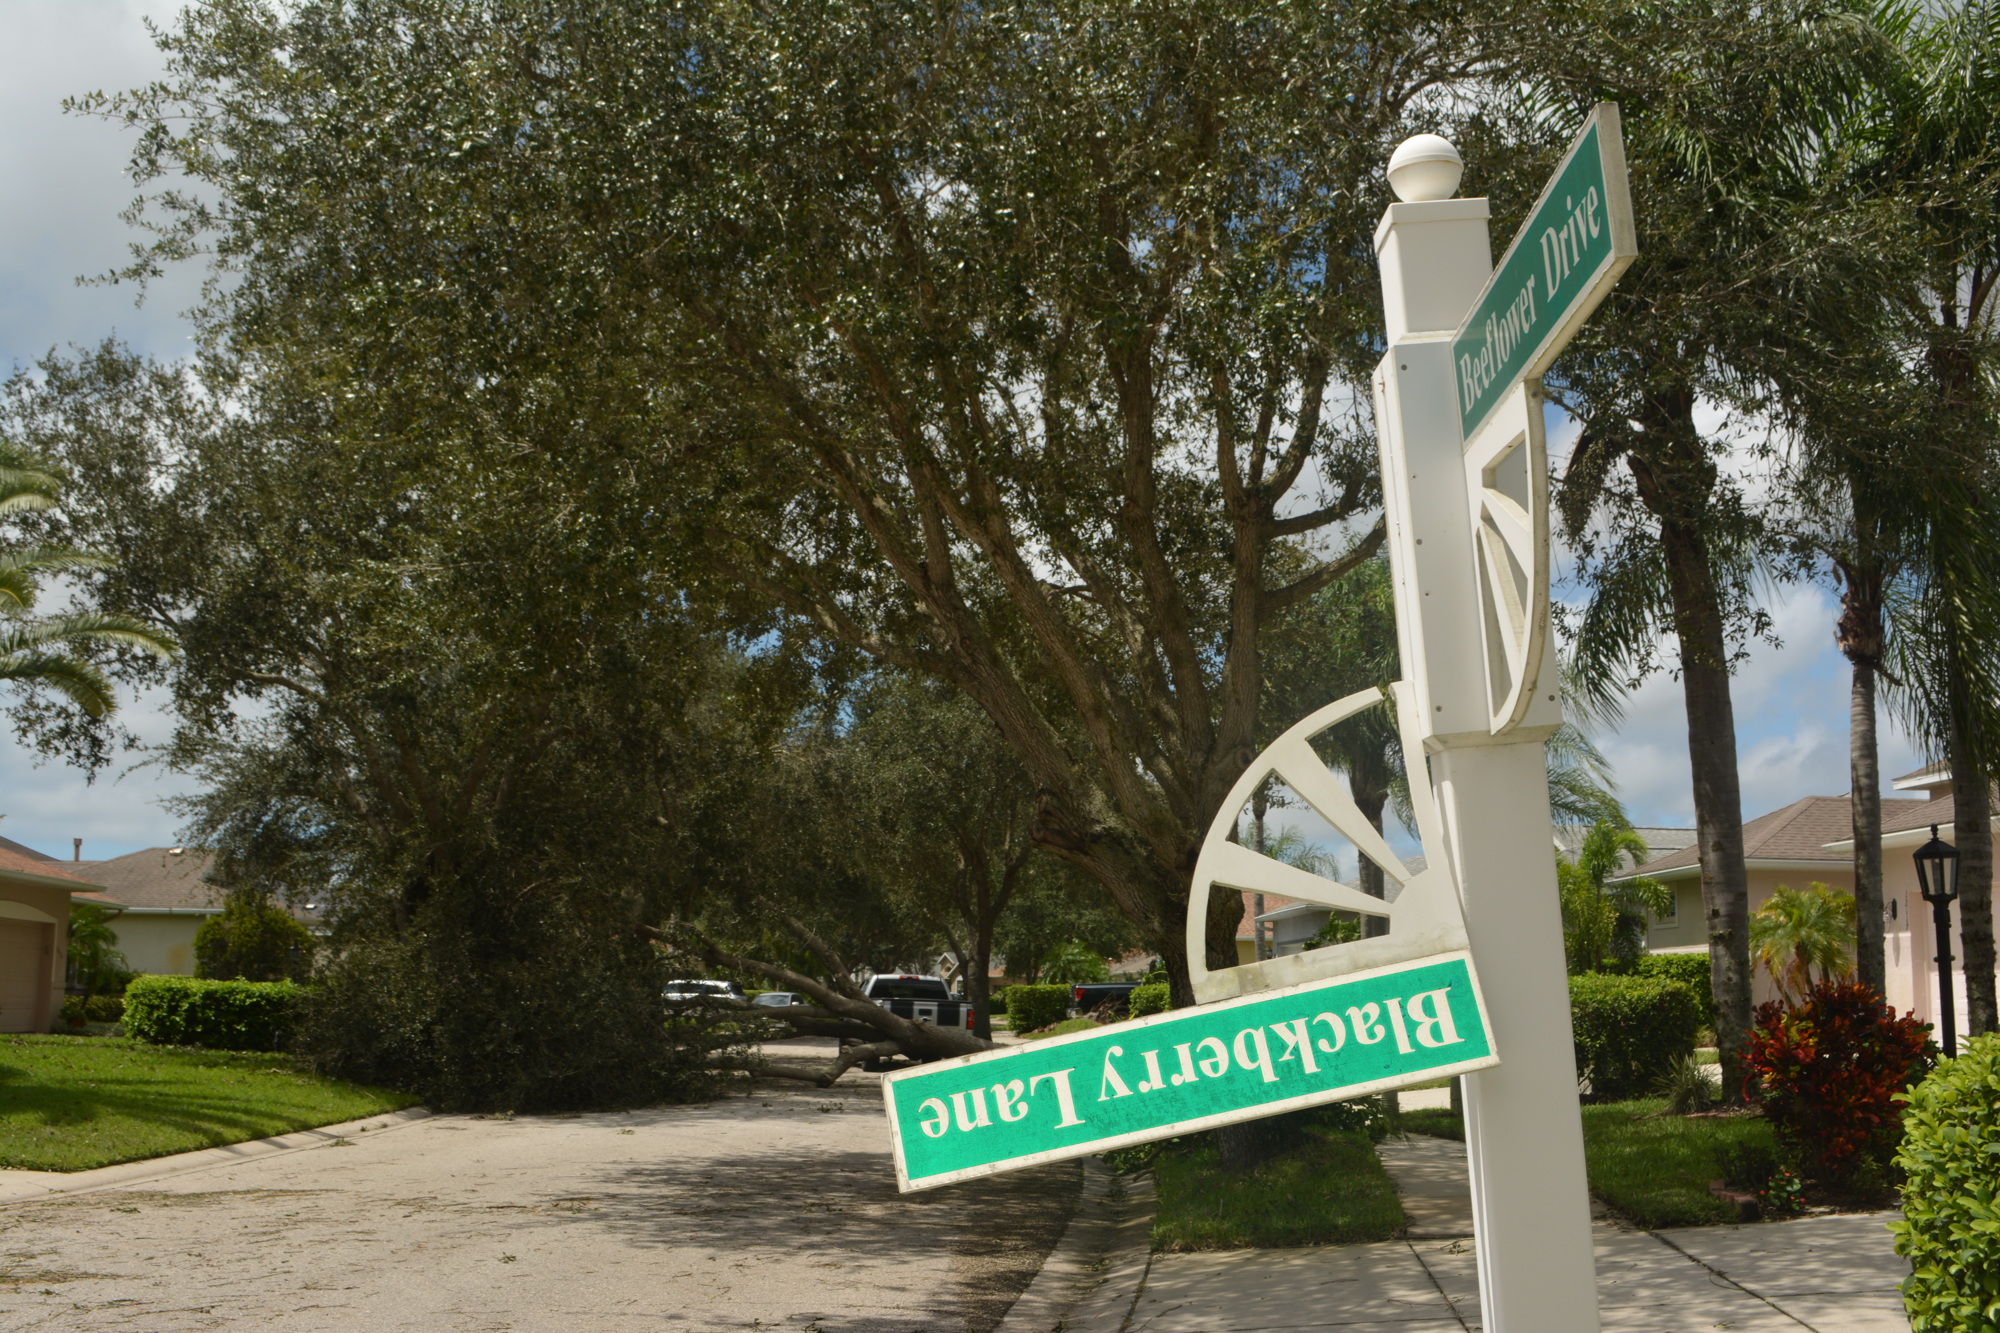 Hurricane Irma turned the lives of East County residents upside down, even those on Blackberry Lane in Lakewood Ranch's Summerfield.